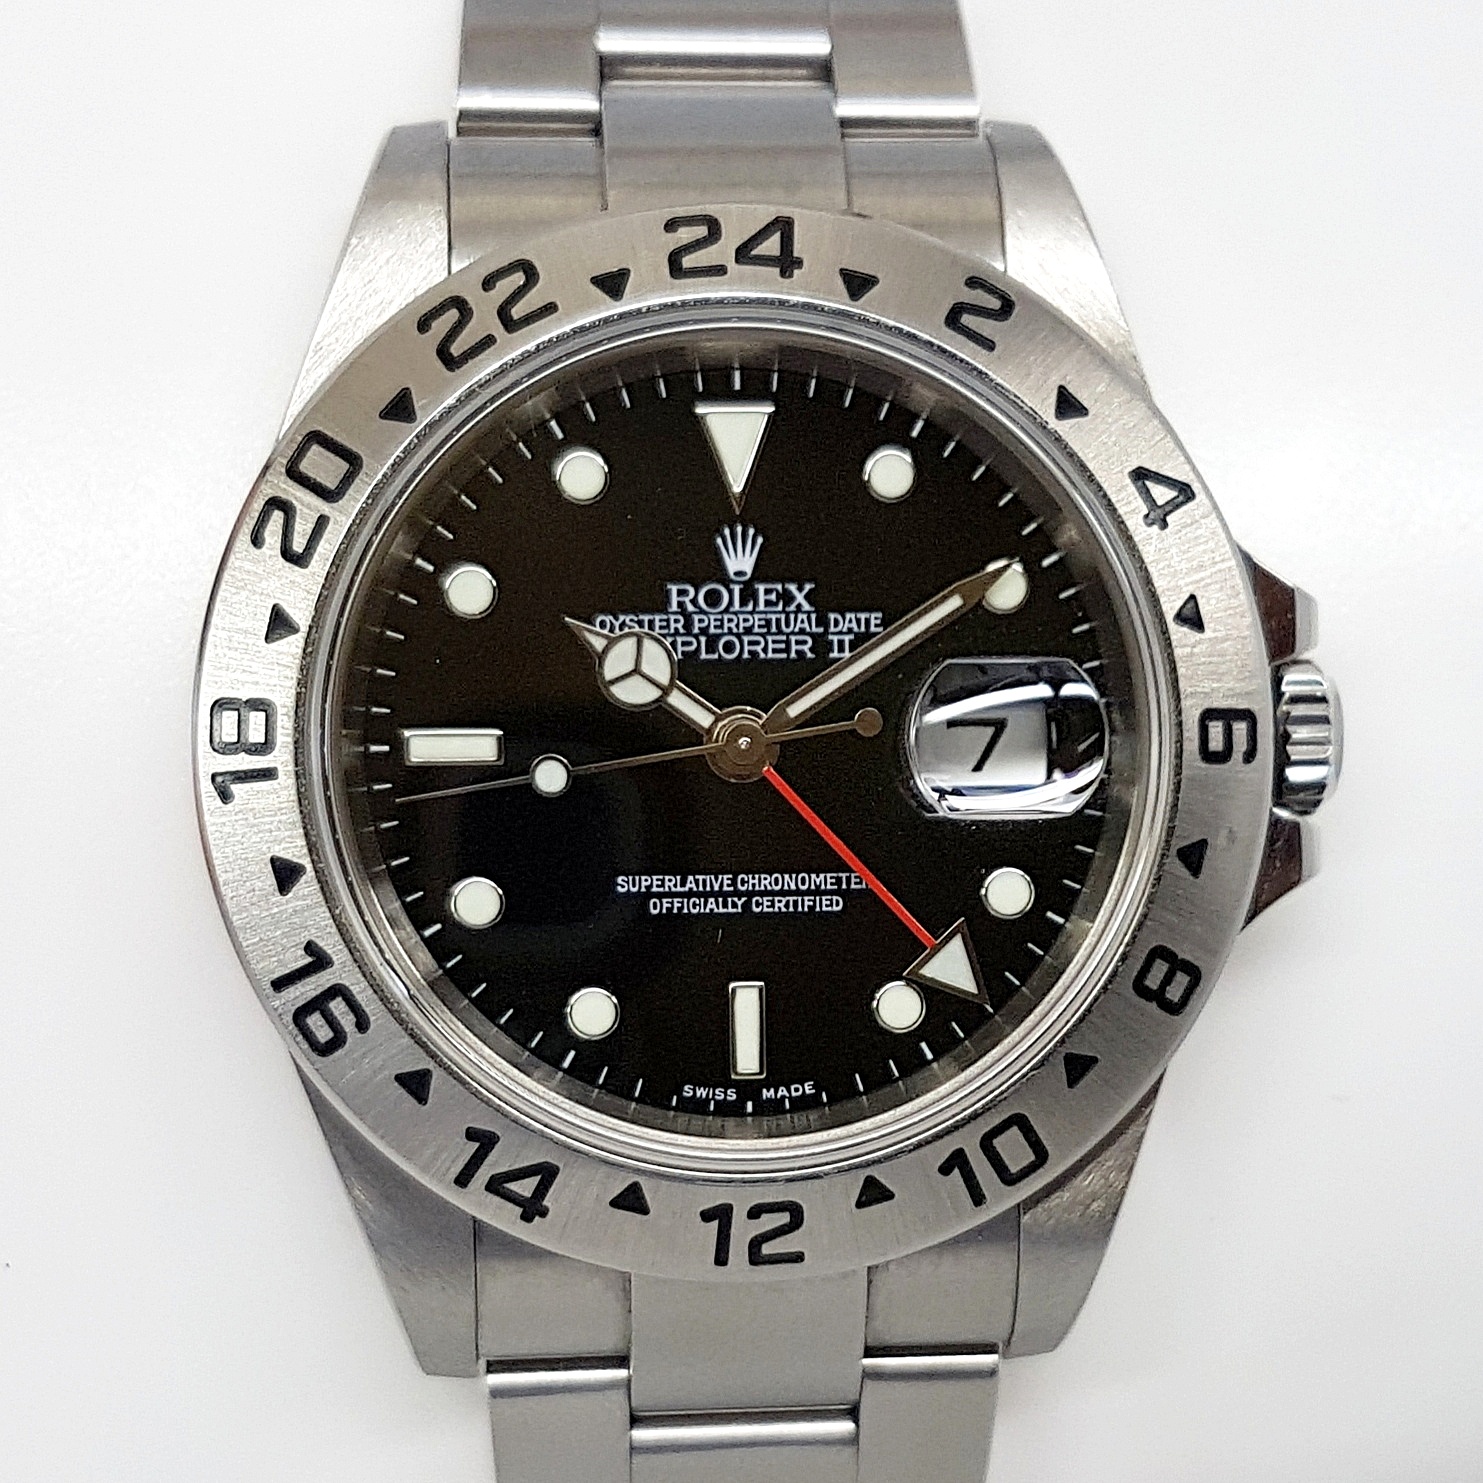 Rolex Explorer ll 40MM Automatic Stainless Steel Black Dial 16570 'B